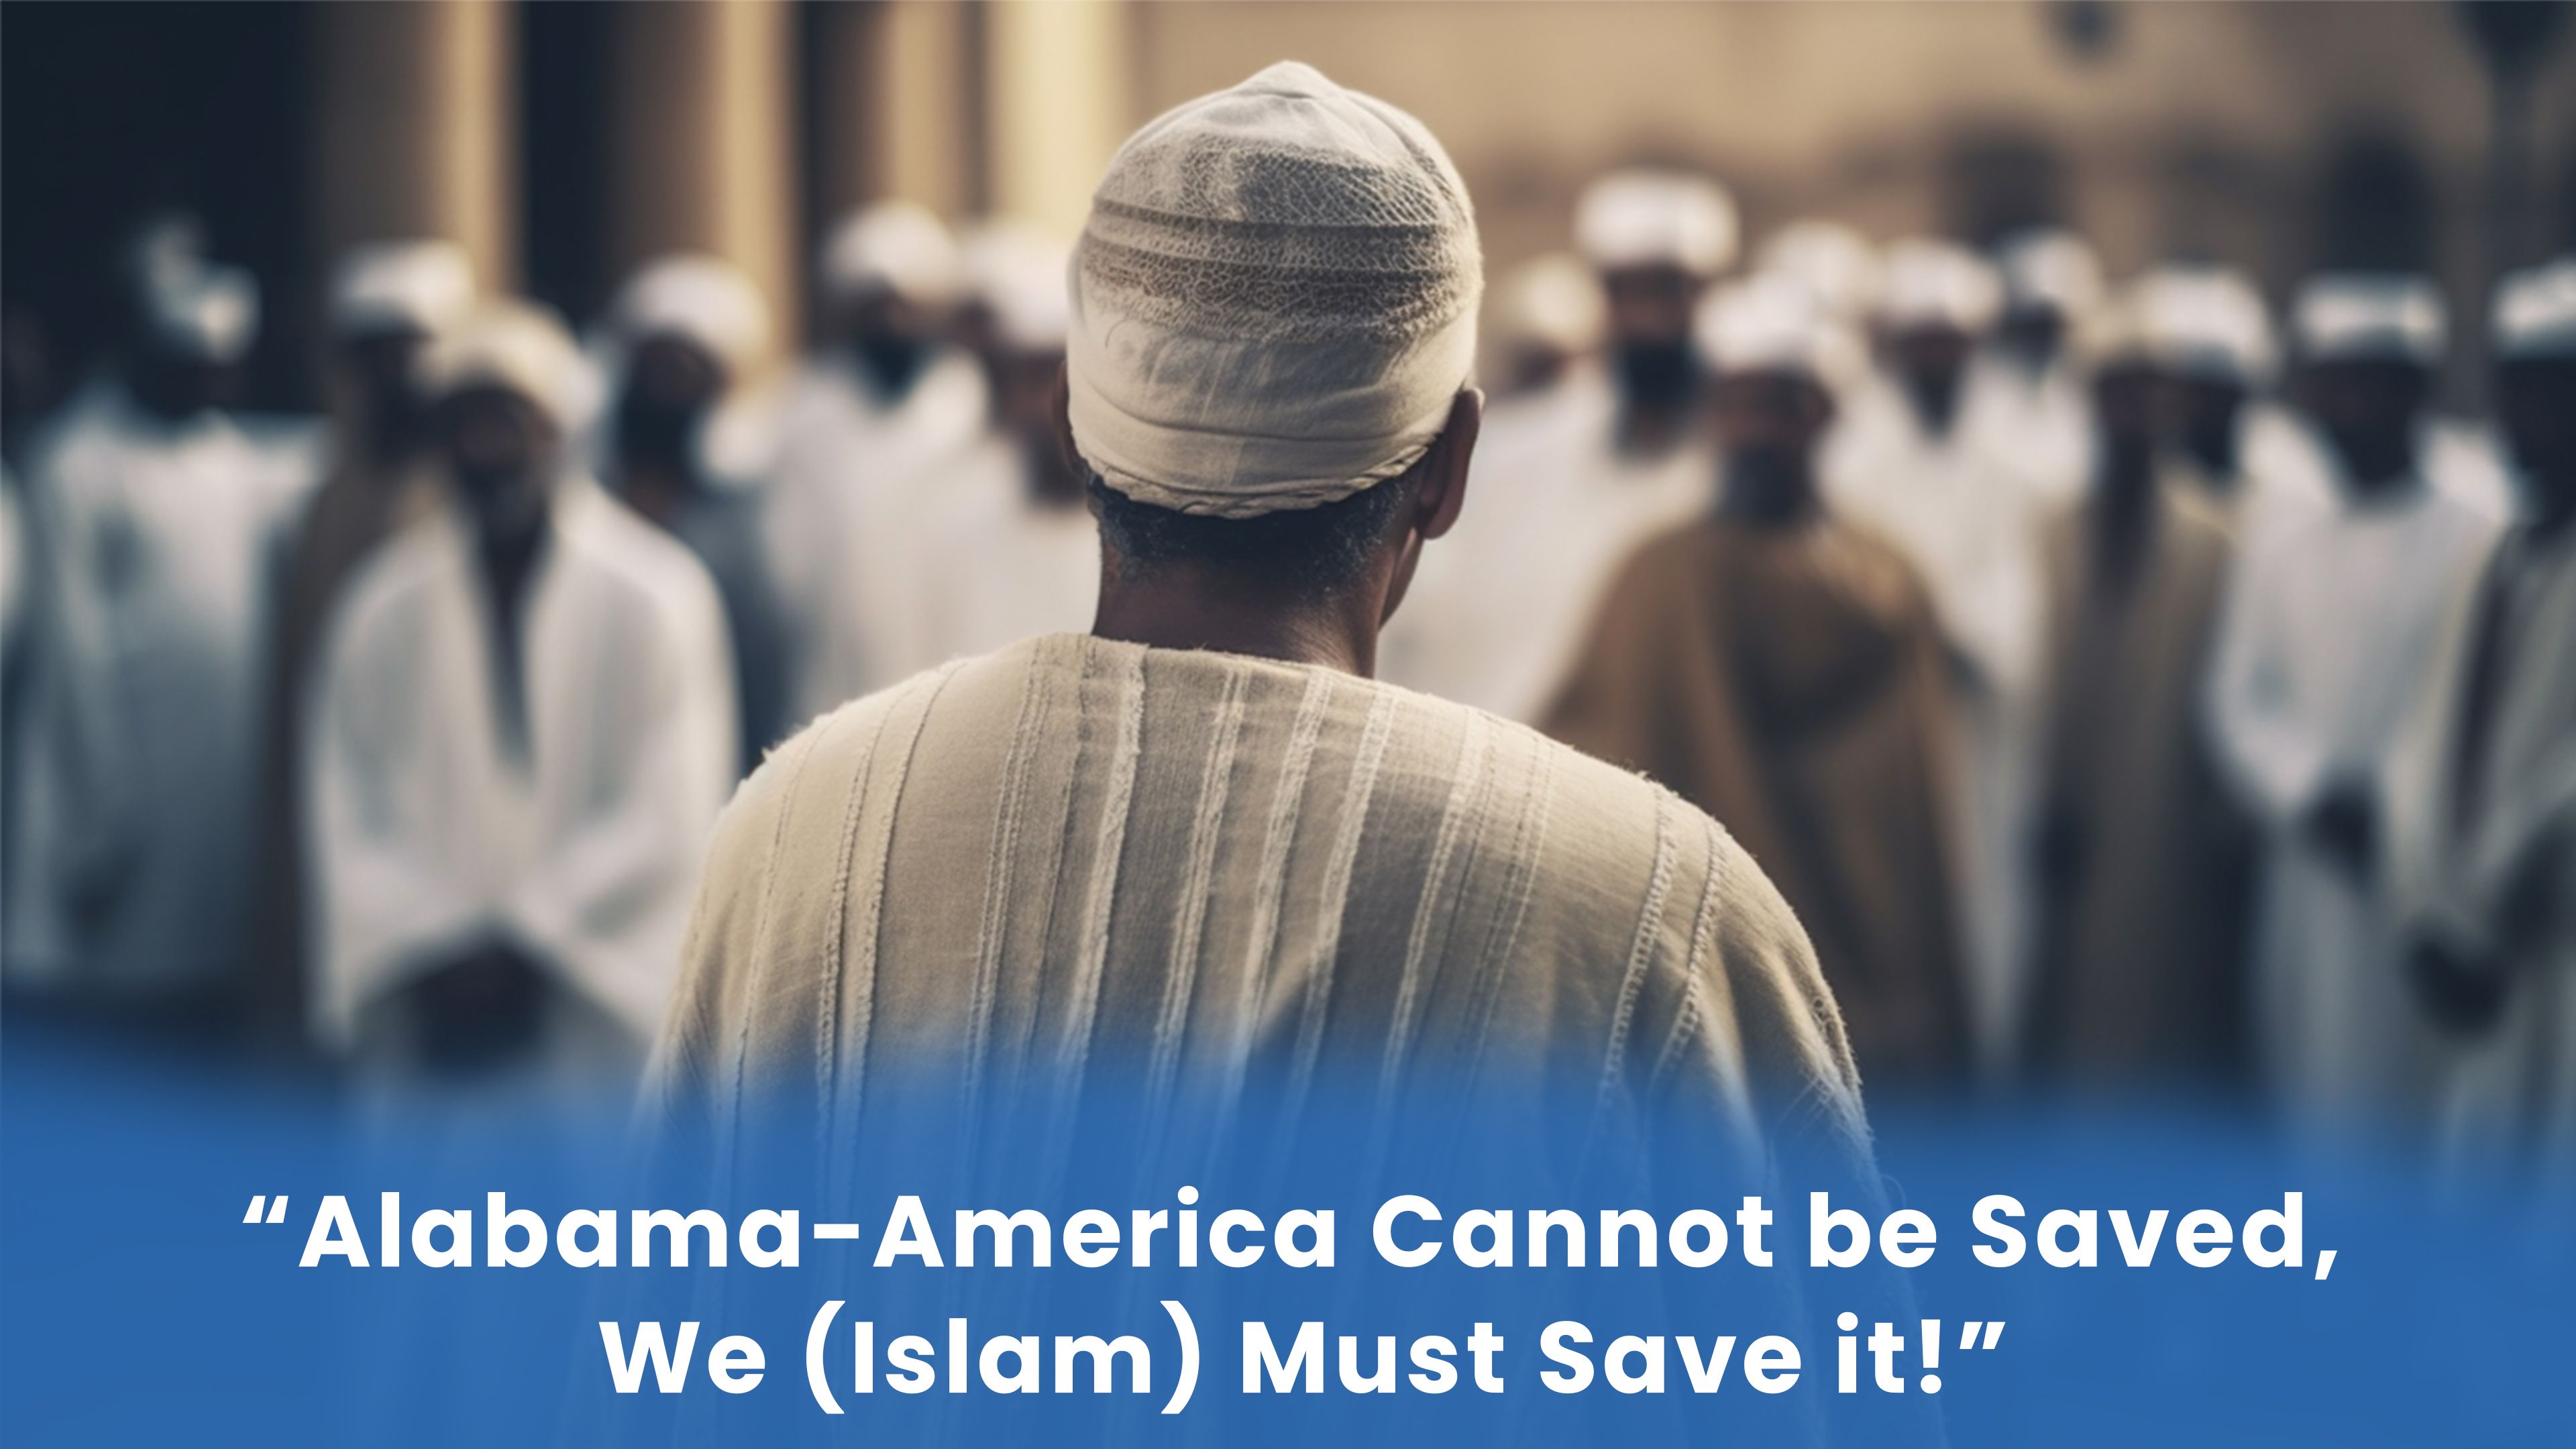 Alabama-America Cannot be Saved, We (Islam) Must Save it!